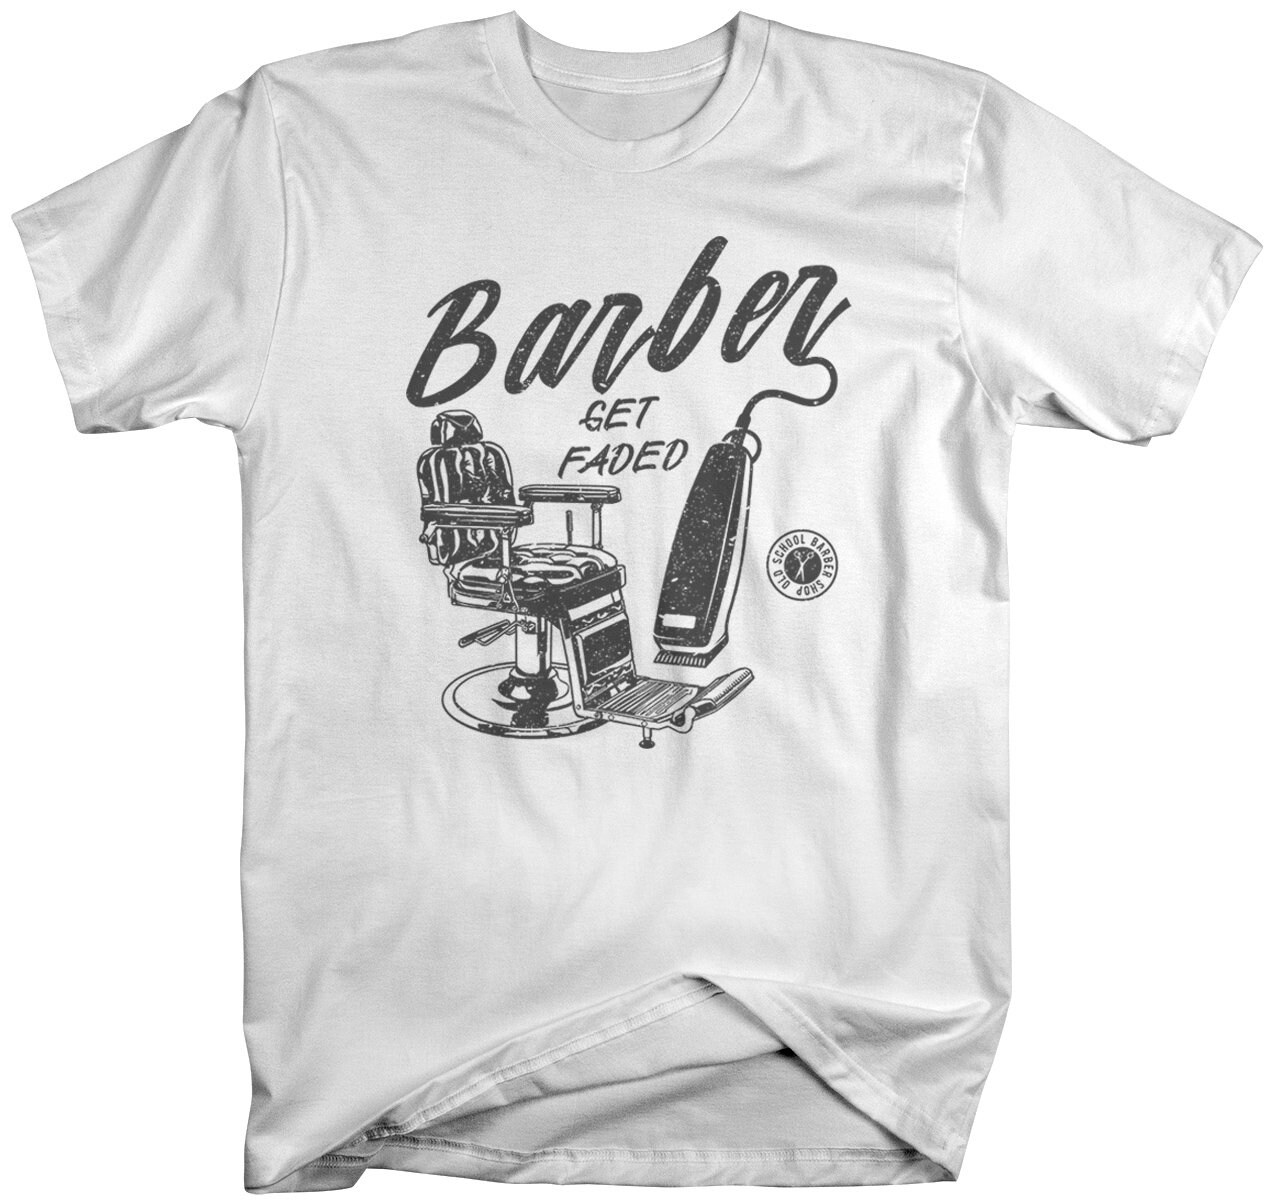 Women's Barber T-Shirt Get Faded Vintage Tee Chair Clippers Barbers Sh